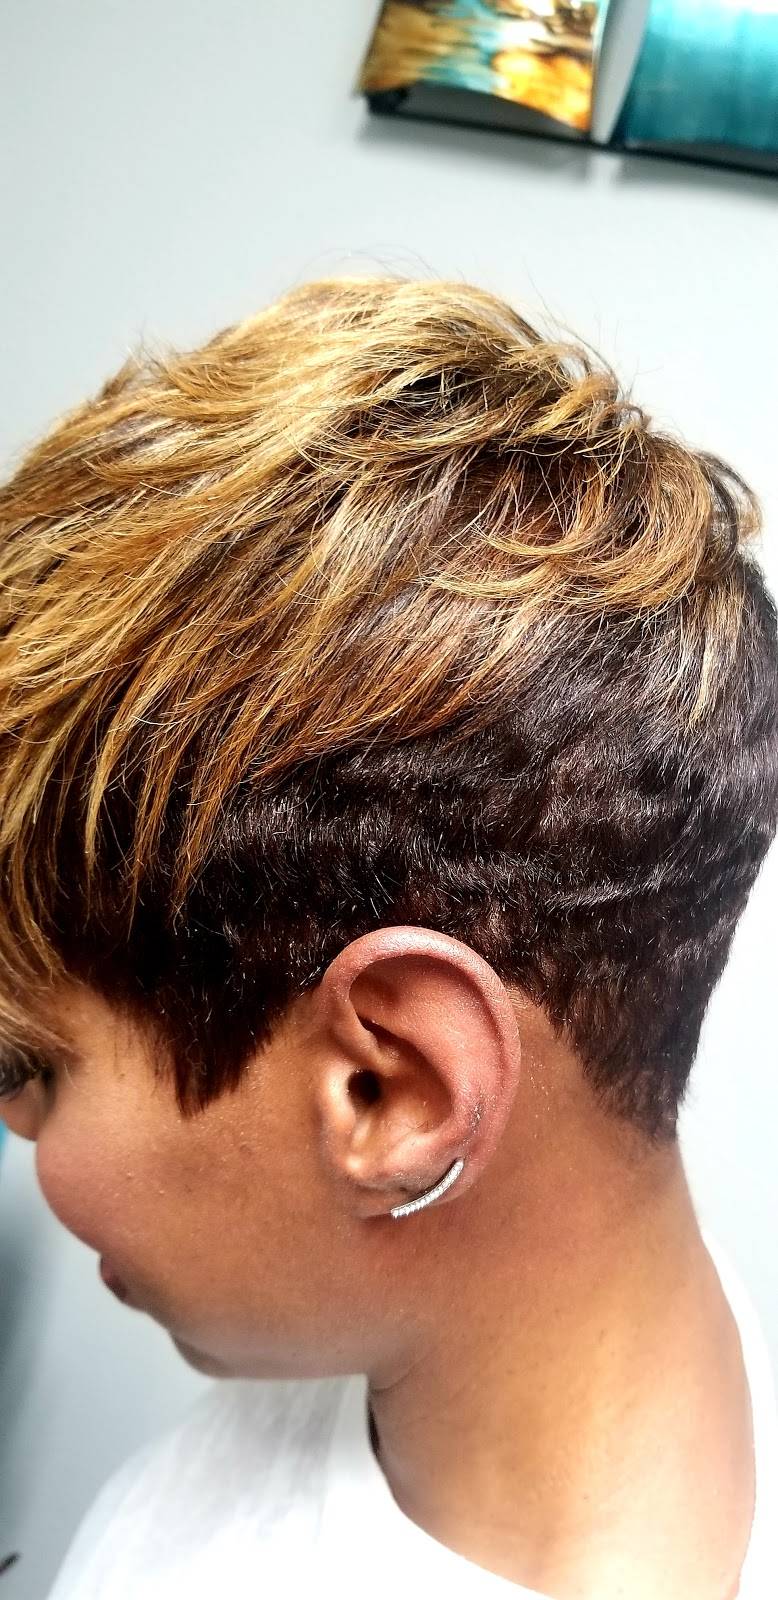 After Affects Hair Studio | 7989 Southtown Dr UNIT 310, Bloomington, MN 55431 | Phone: (612) 481-2655